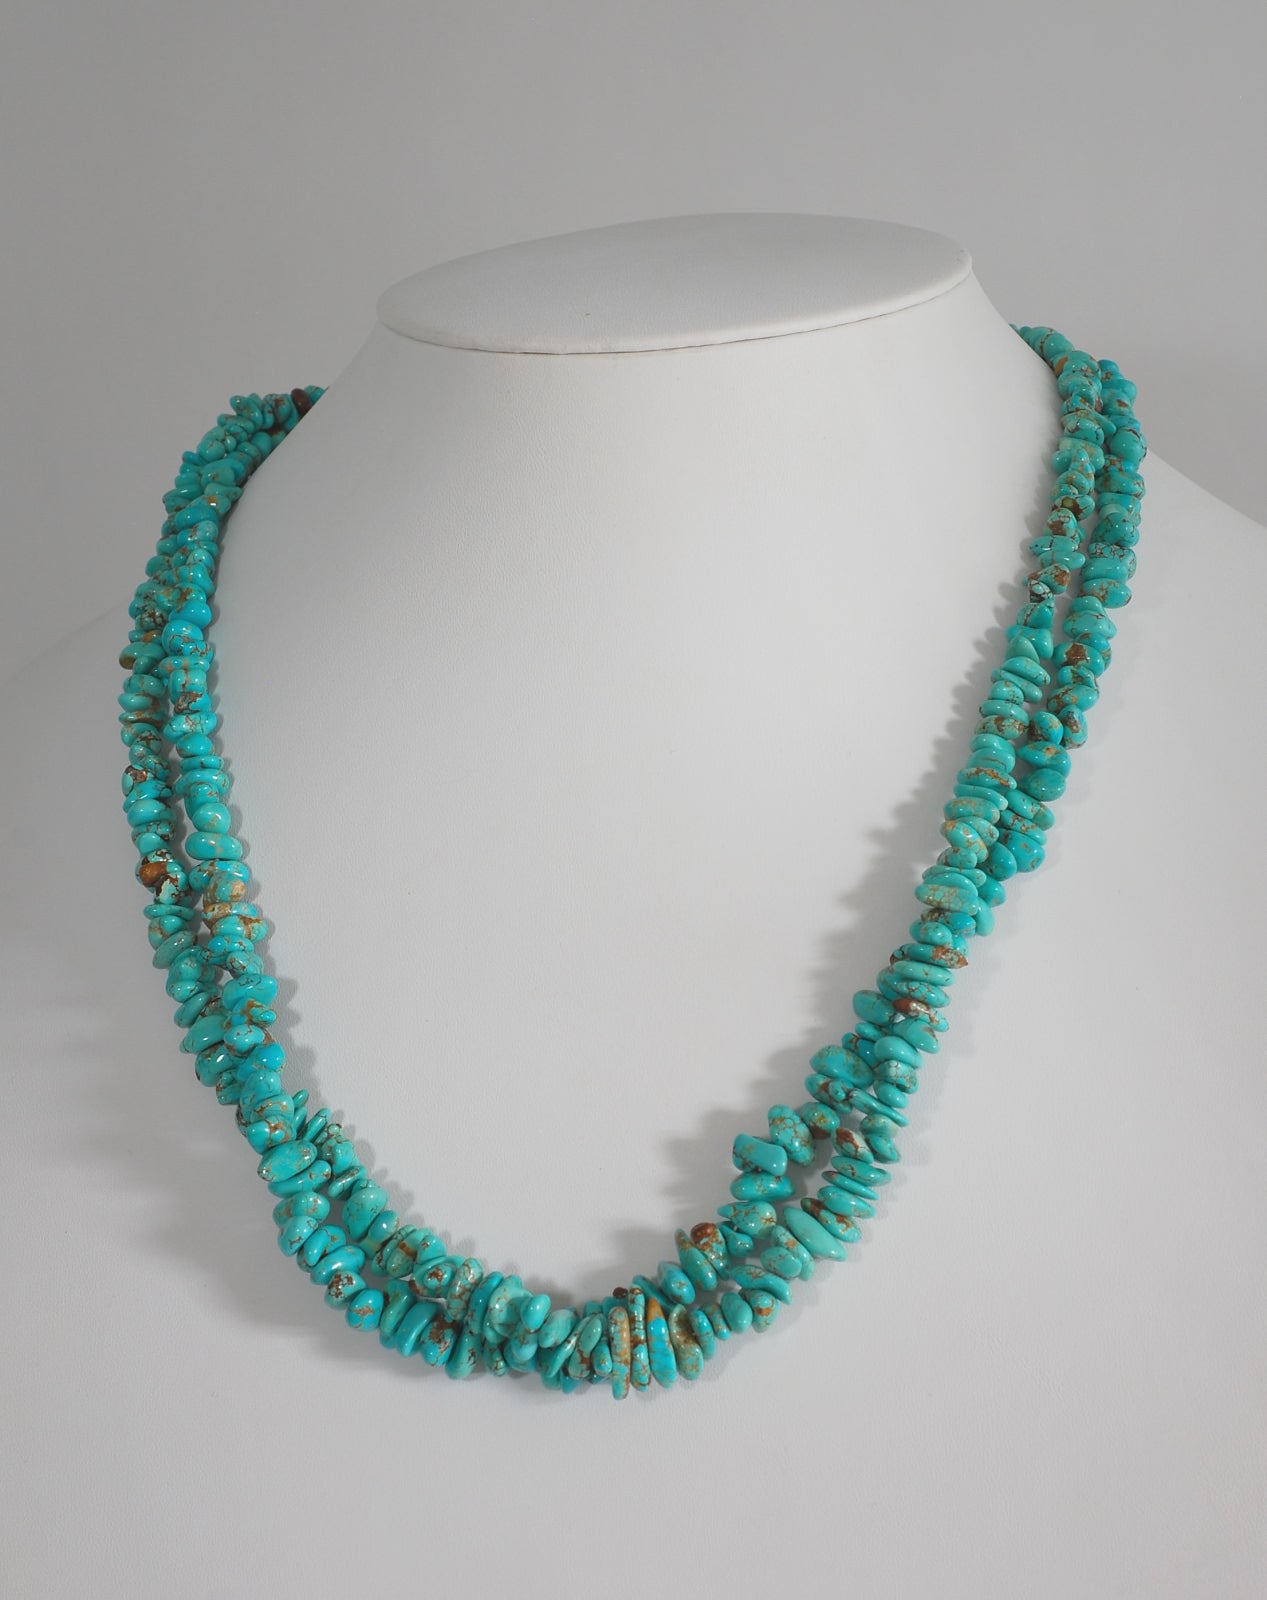 Two Strand Natural #8 Turquoise Nugget Necklace